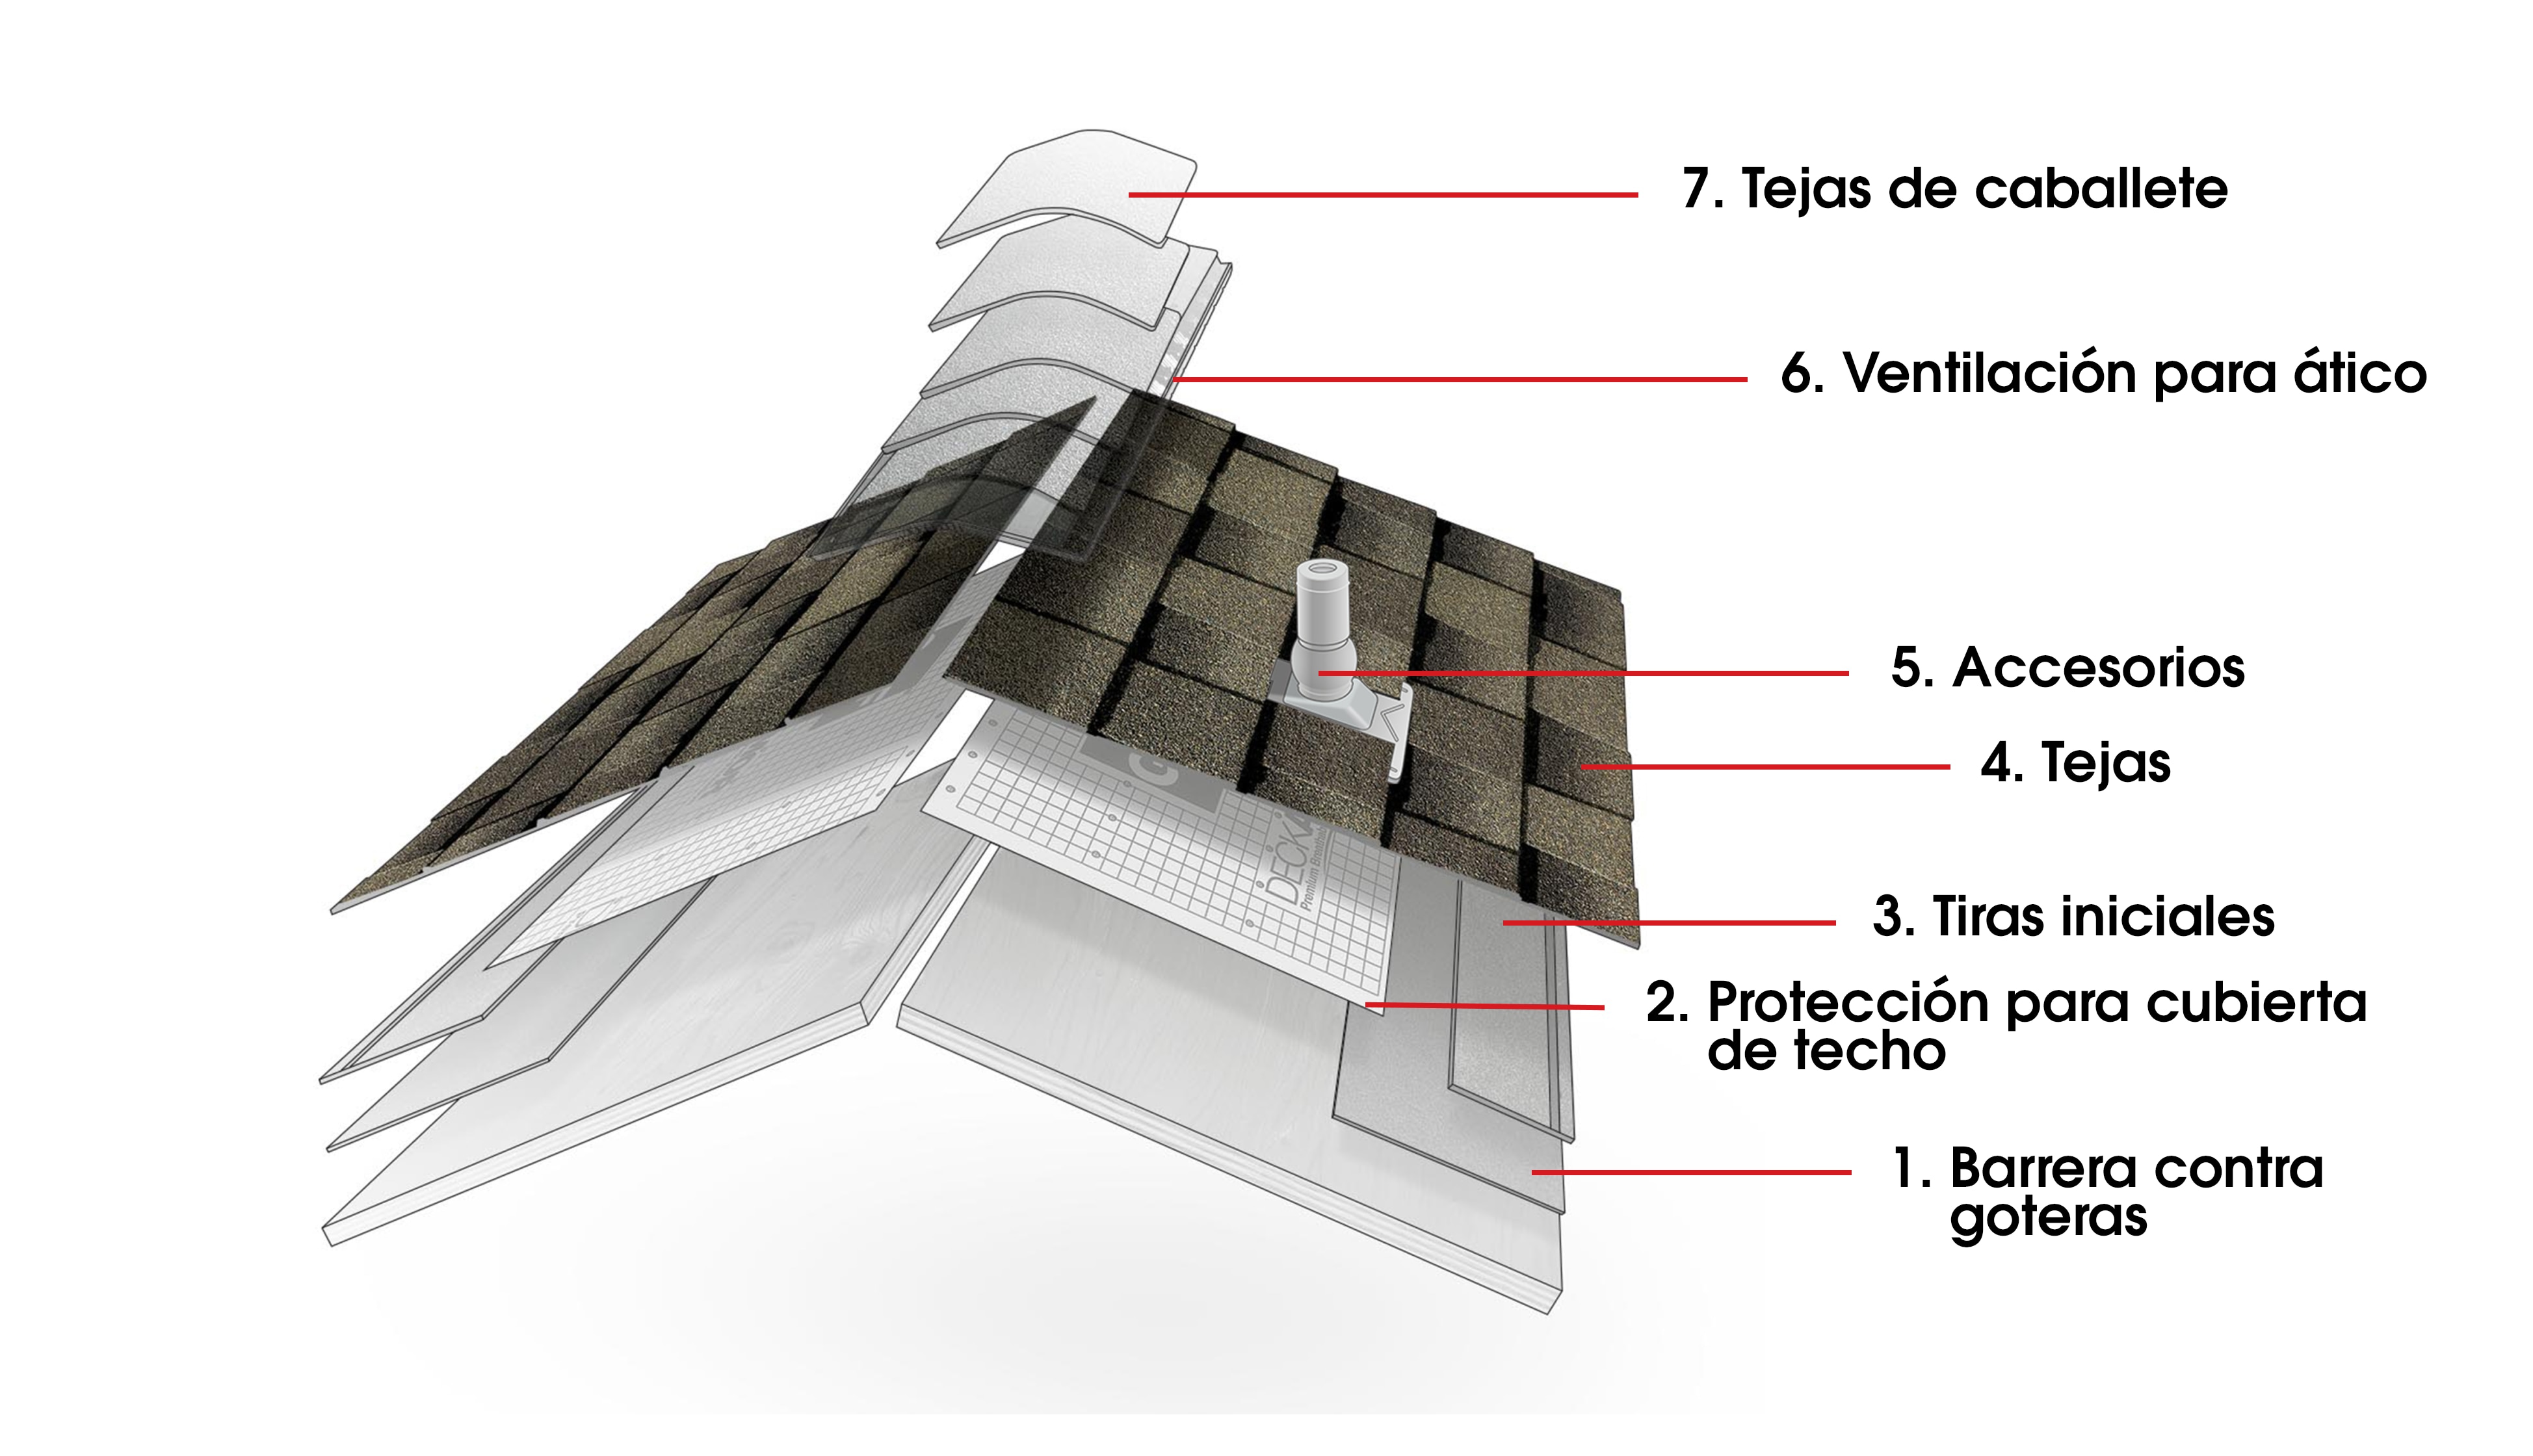 Components of a residential roofing system